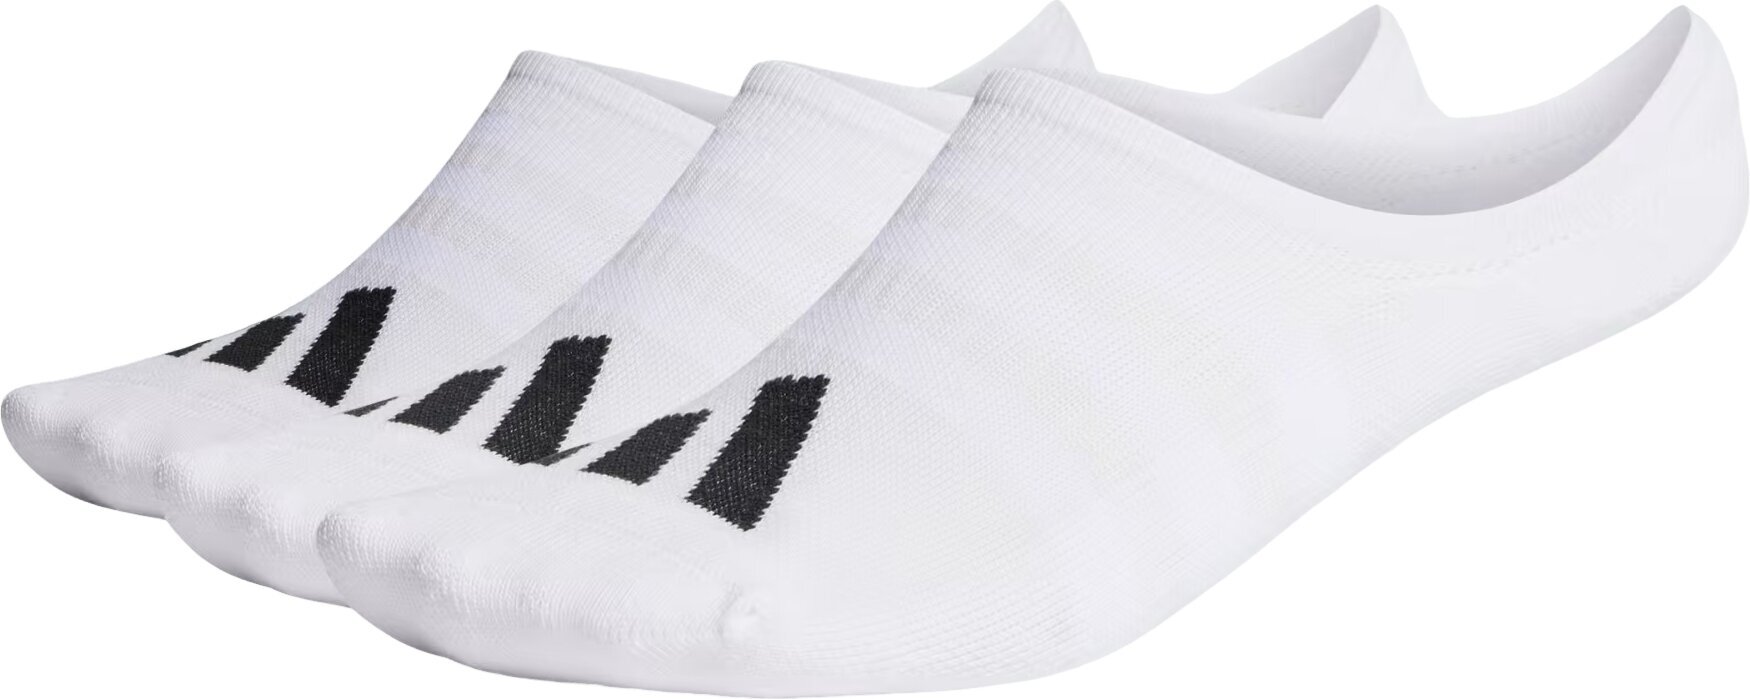 Chaussettes Adidas No Show Golf Socks 3-Pairs Chaussettes White 40-42